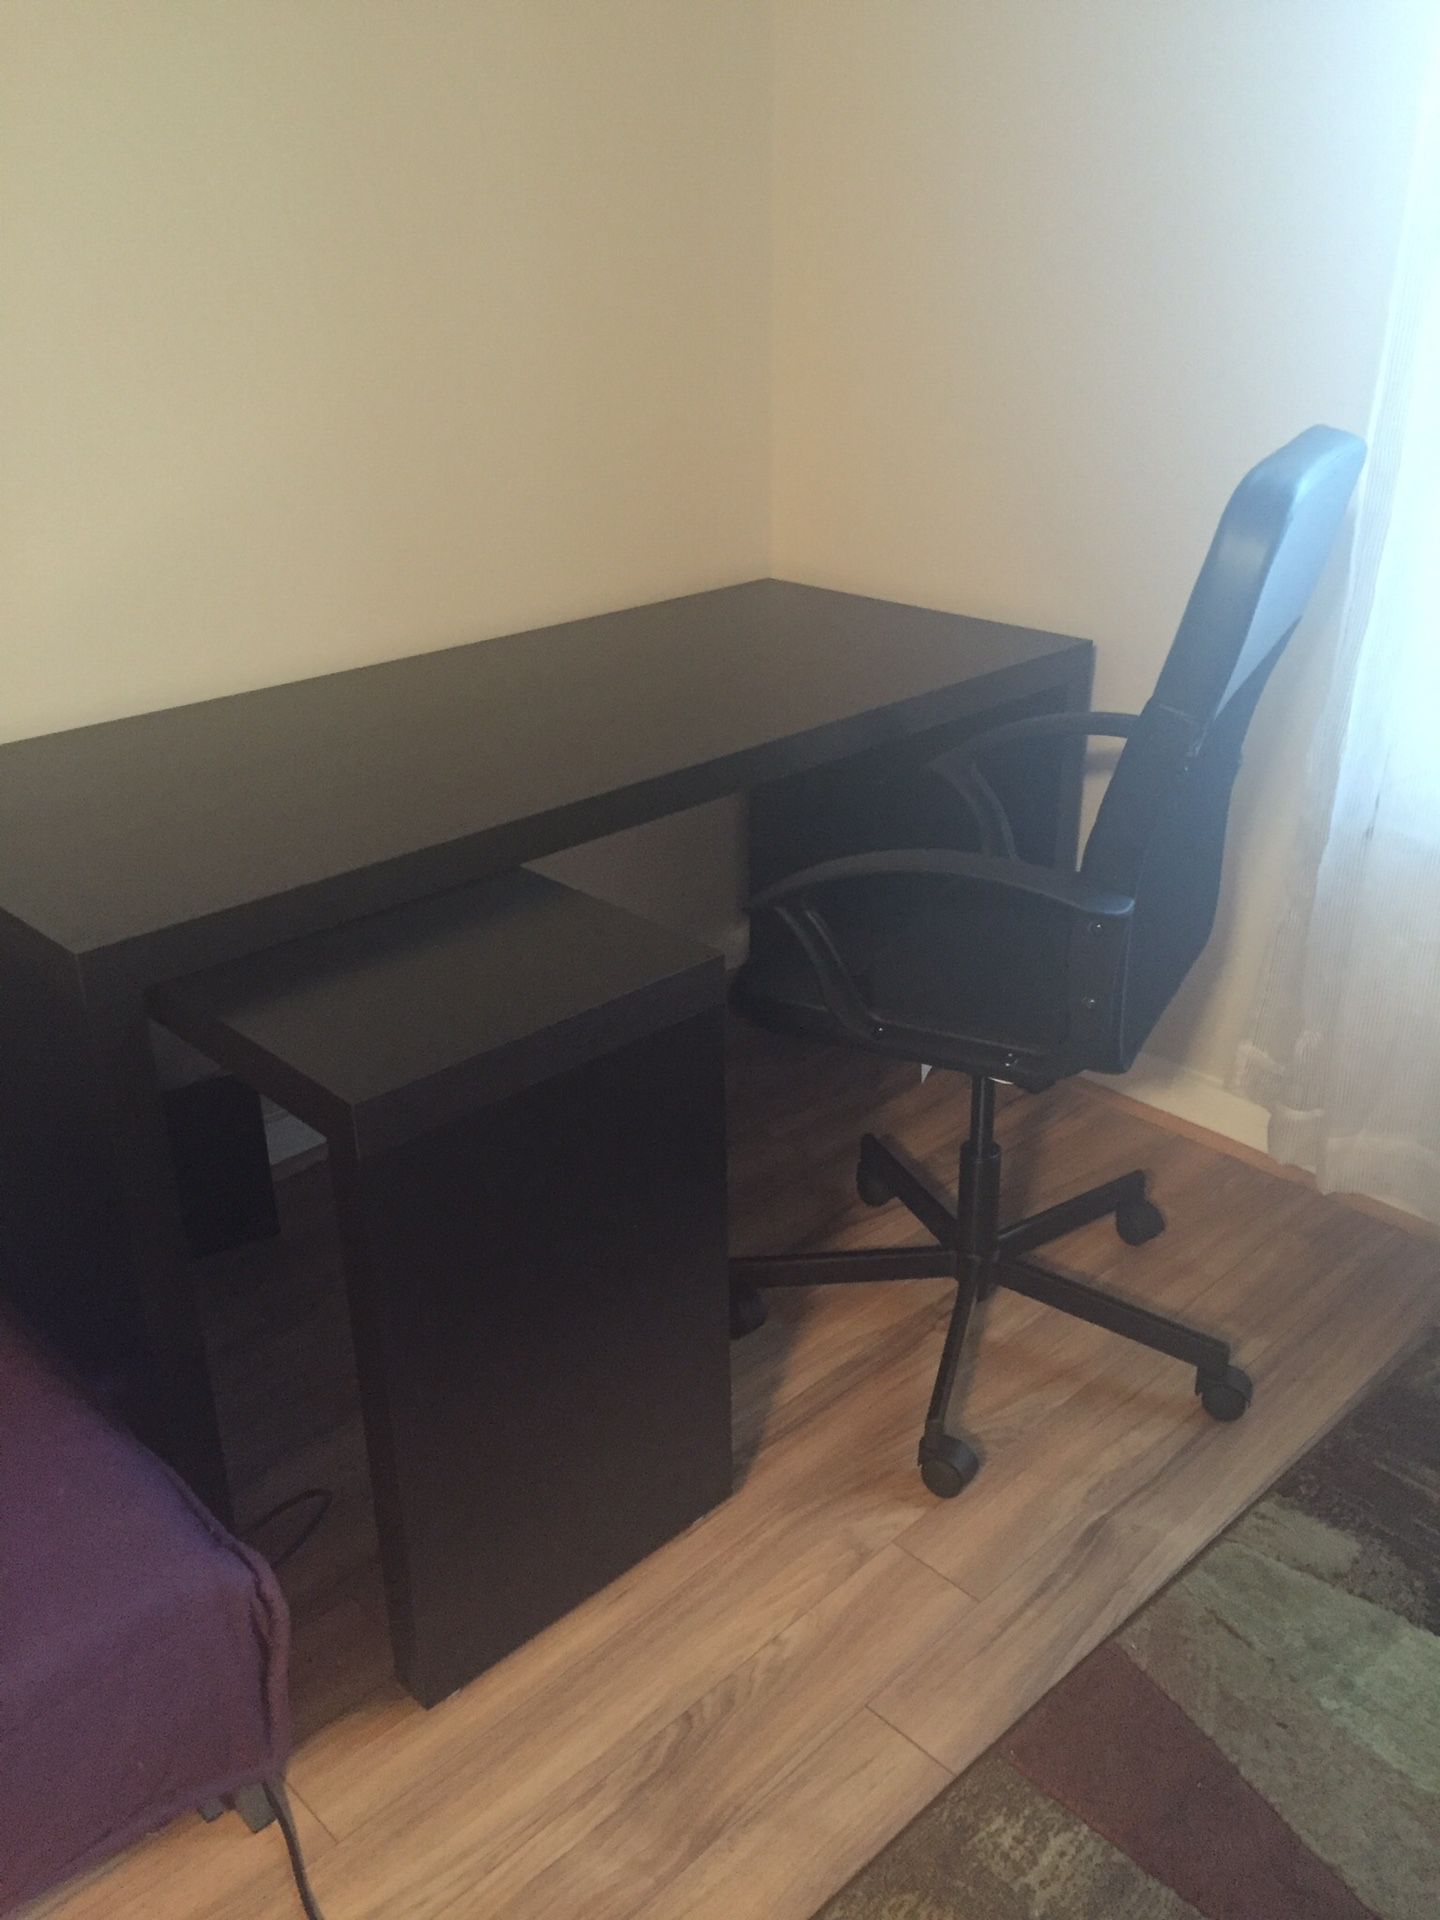 IKEA Malm pull-out desk + swivel chair